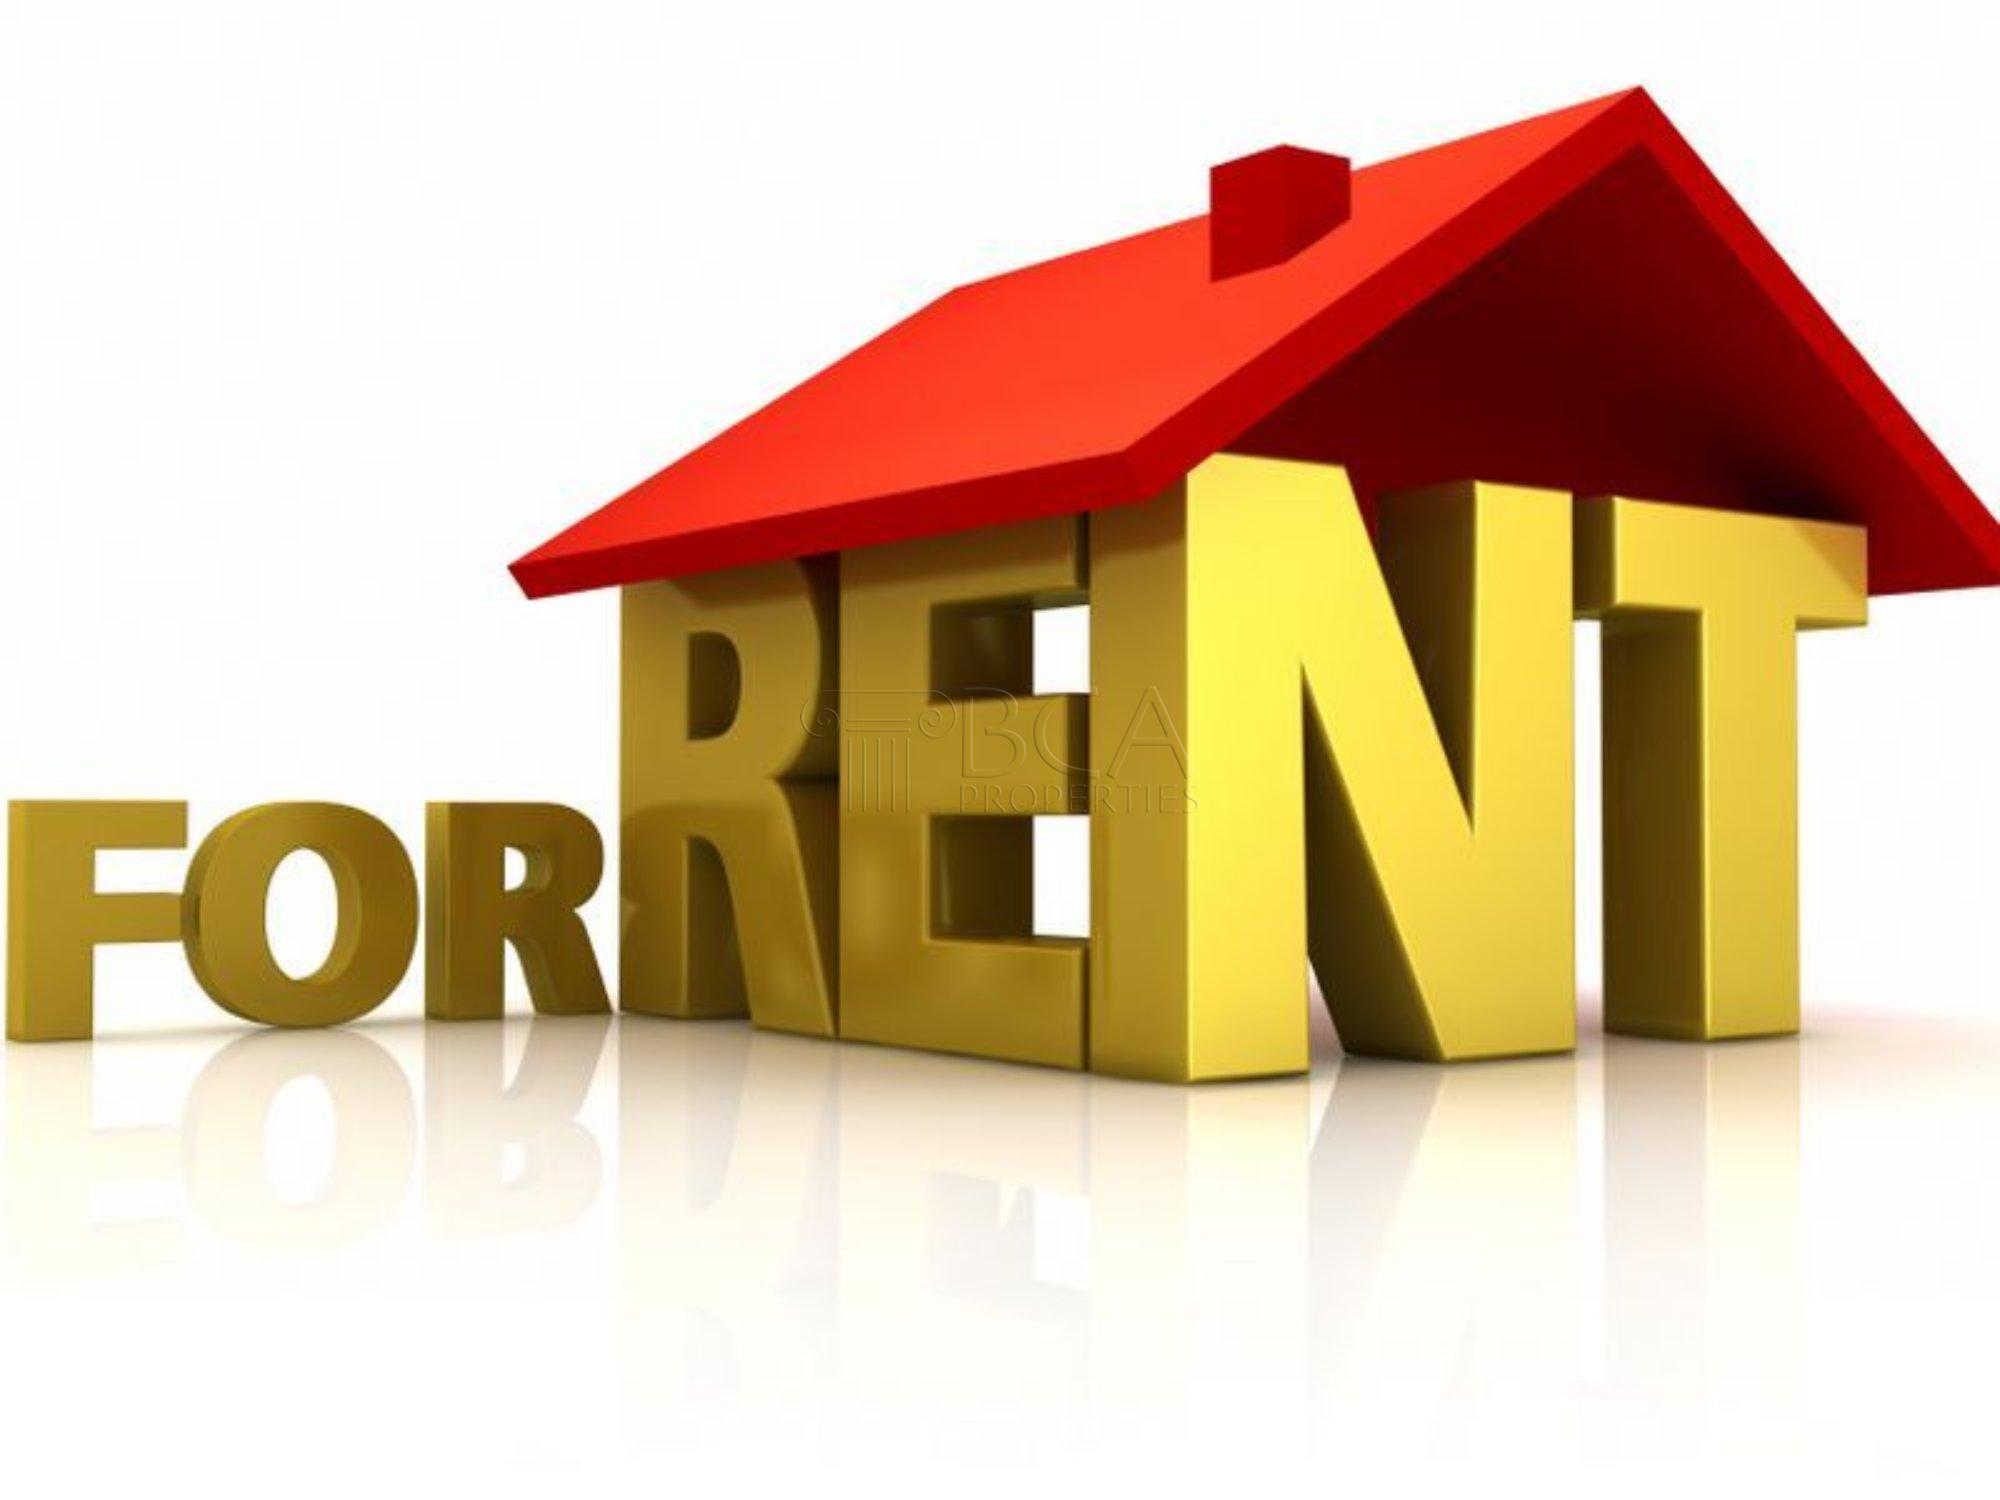 reserve-rent-or-gross-rent-which-one-to-choose-for-rental-price